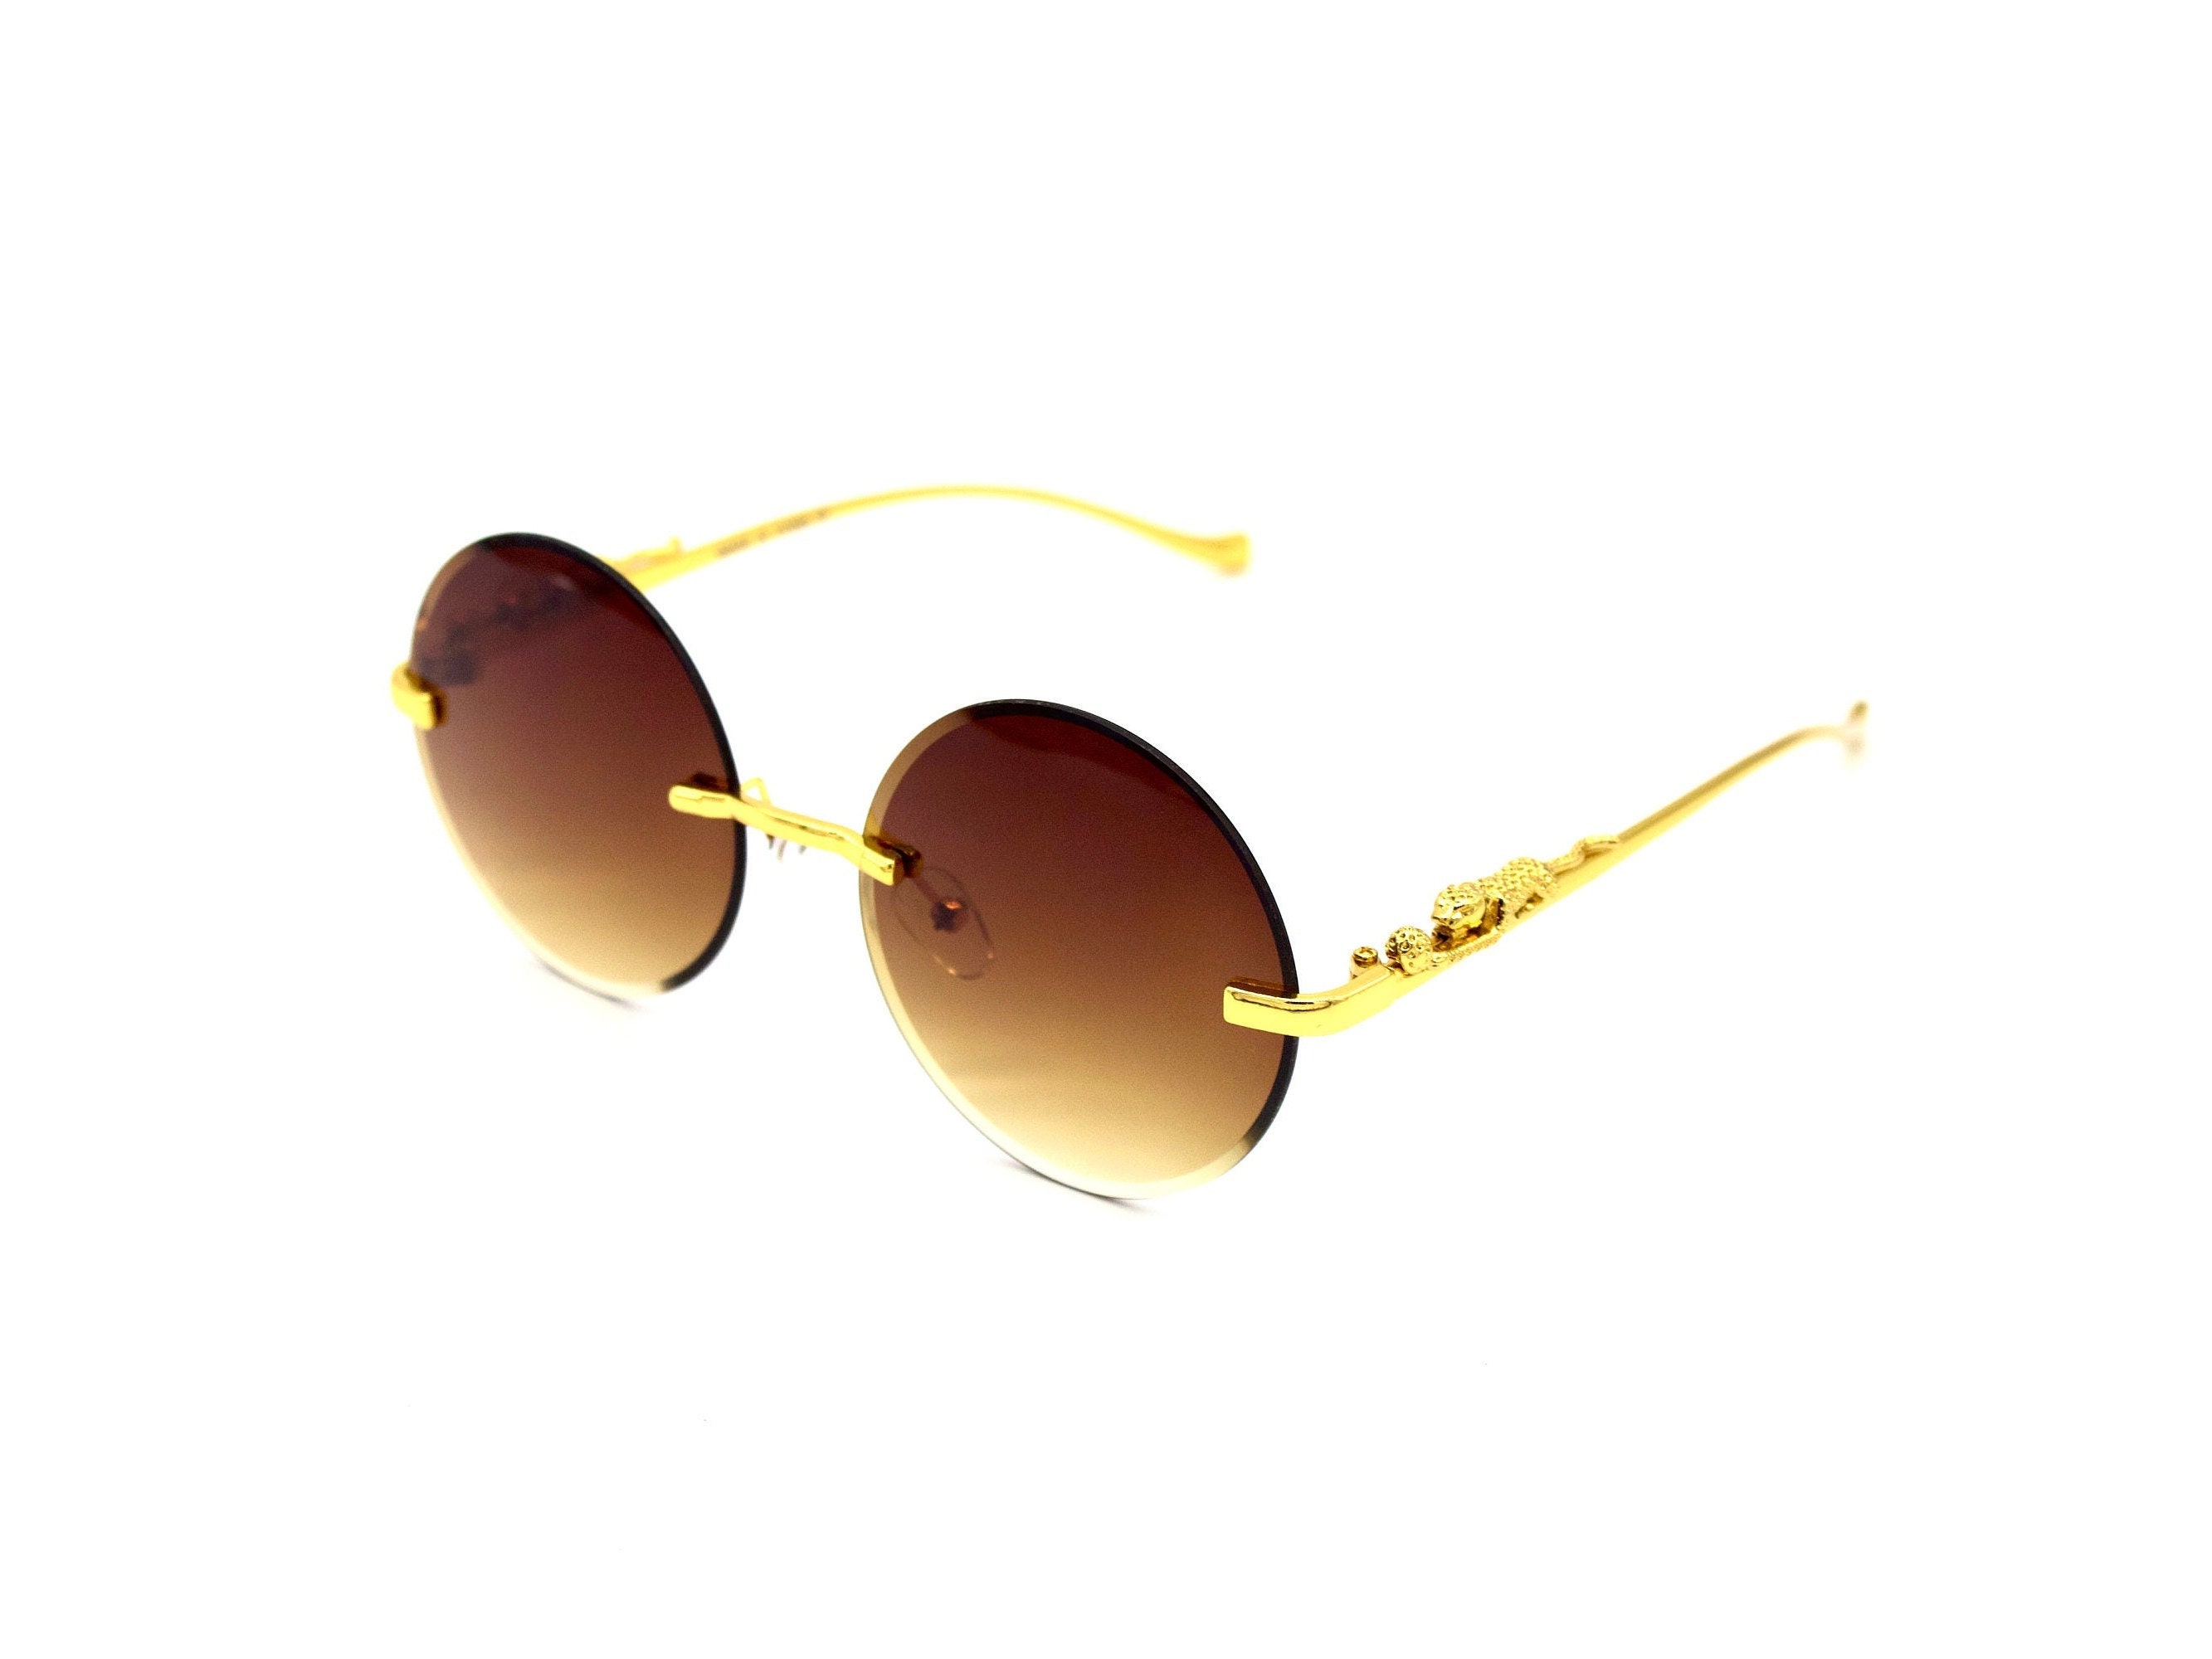 Vintage Gold Frame Silver Sunglasses For Men And Women Classic Attitude  Style With UV400 Protection And Box 0259 From Luxurysunglasses, $34.01